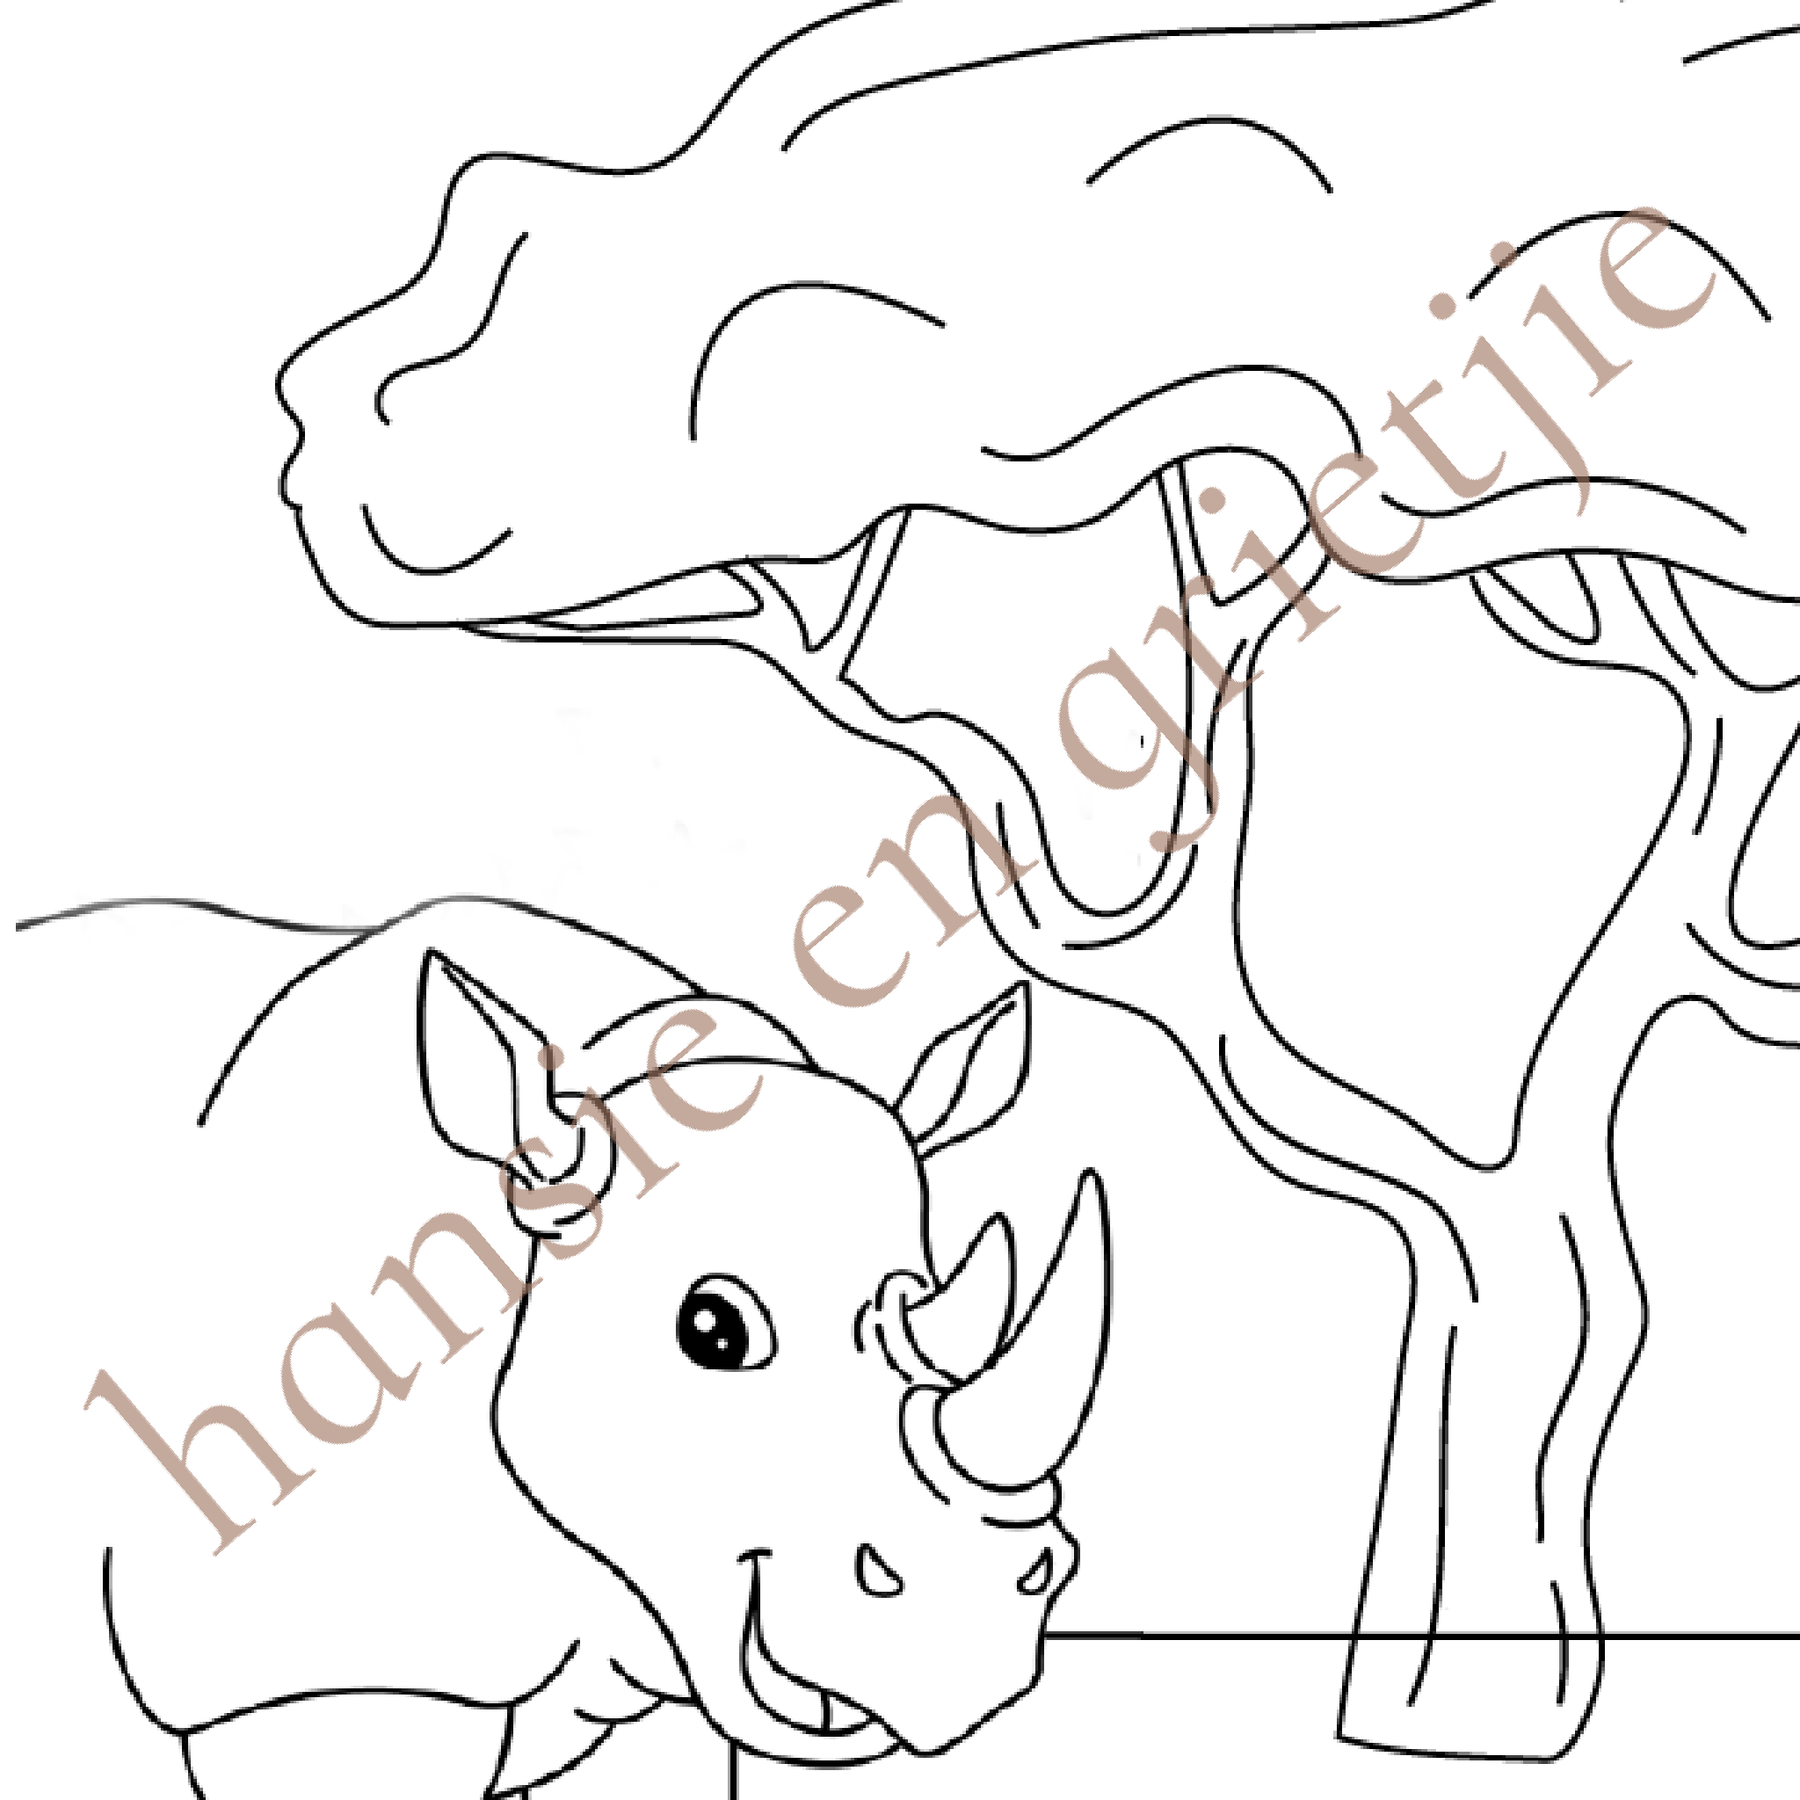 Hansie en Grietjie 'Africa's Threatened Colouring Book for Kids' featuring a rhino design, promoting conservation awareness in Africa.